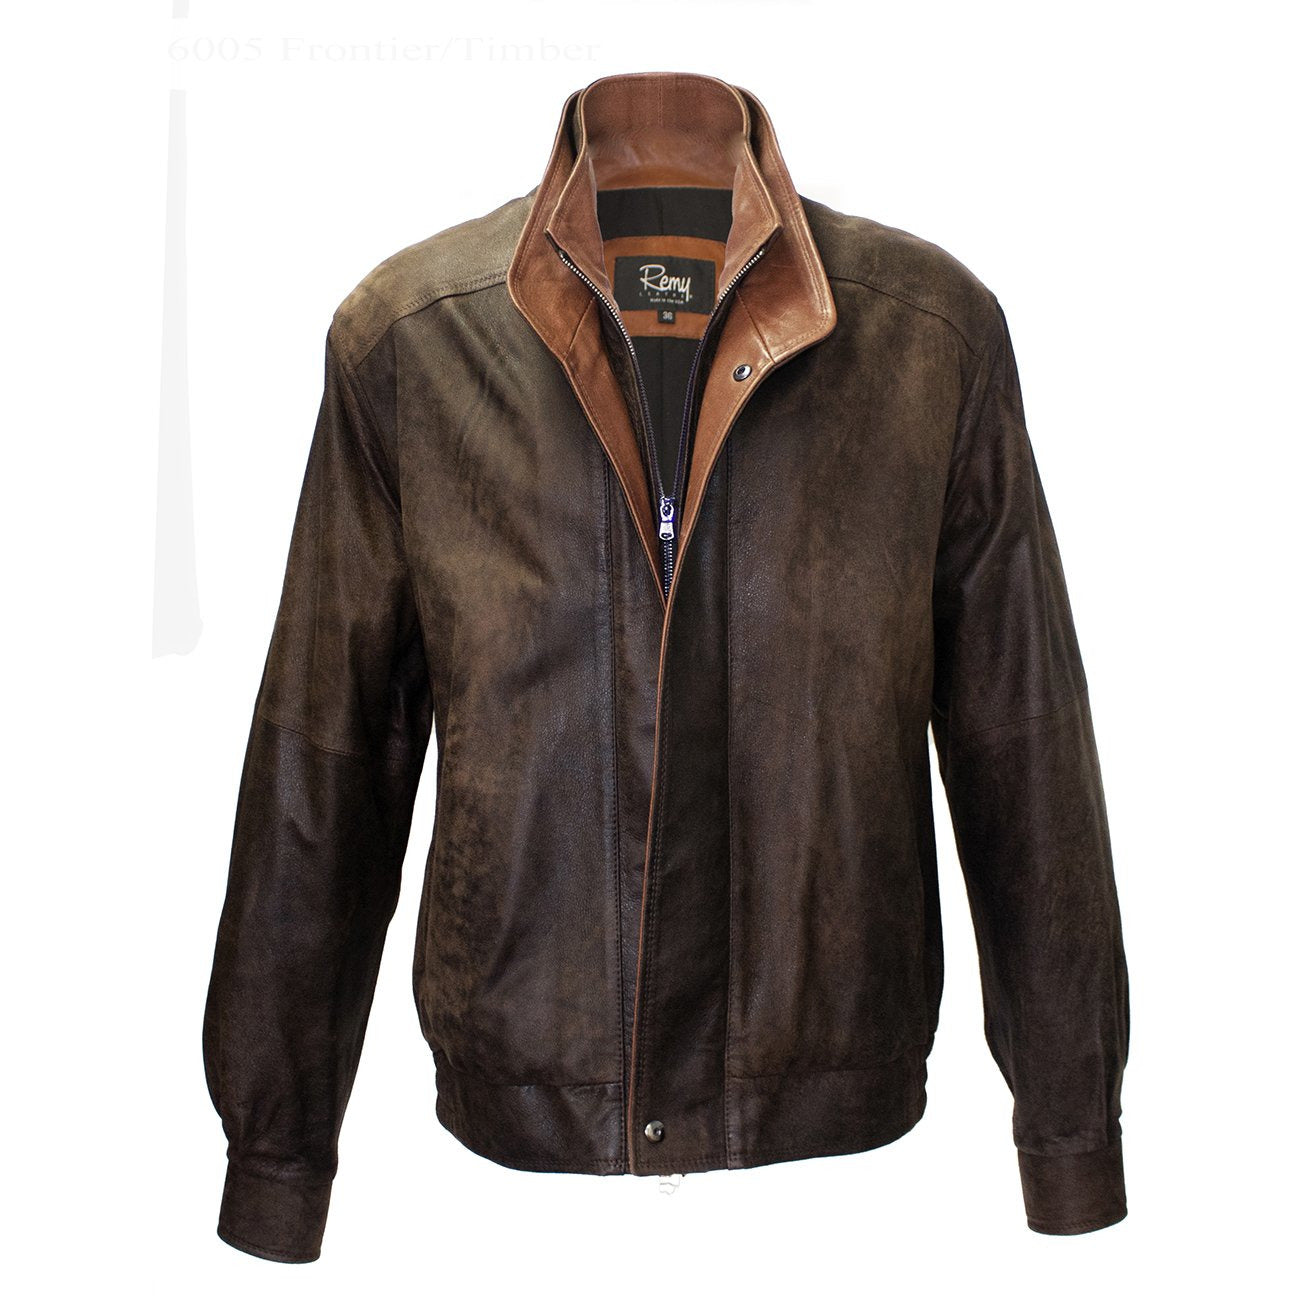 6005 - Mens Leather Double Collar Bomber Jacket in Frontier/Timber